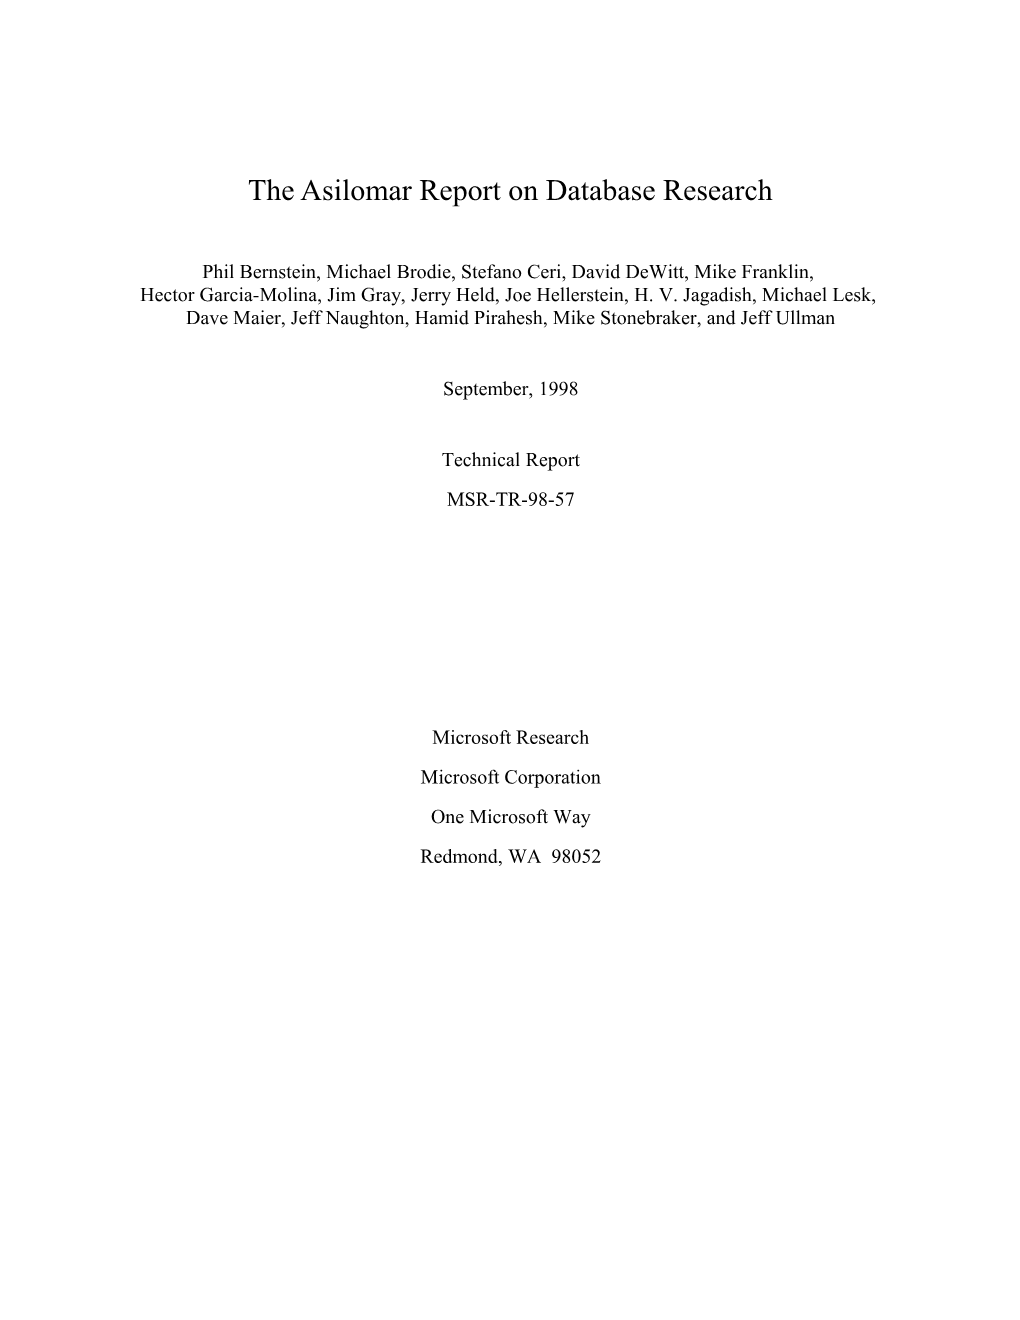 The Asilomar Report on Database Research